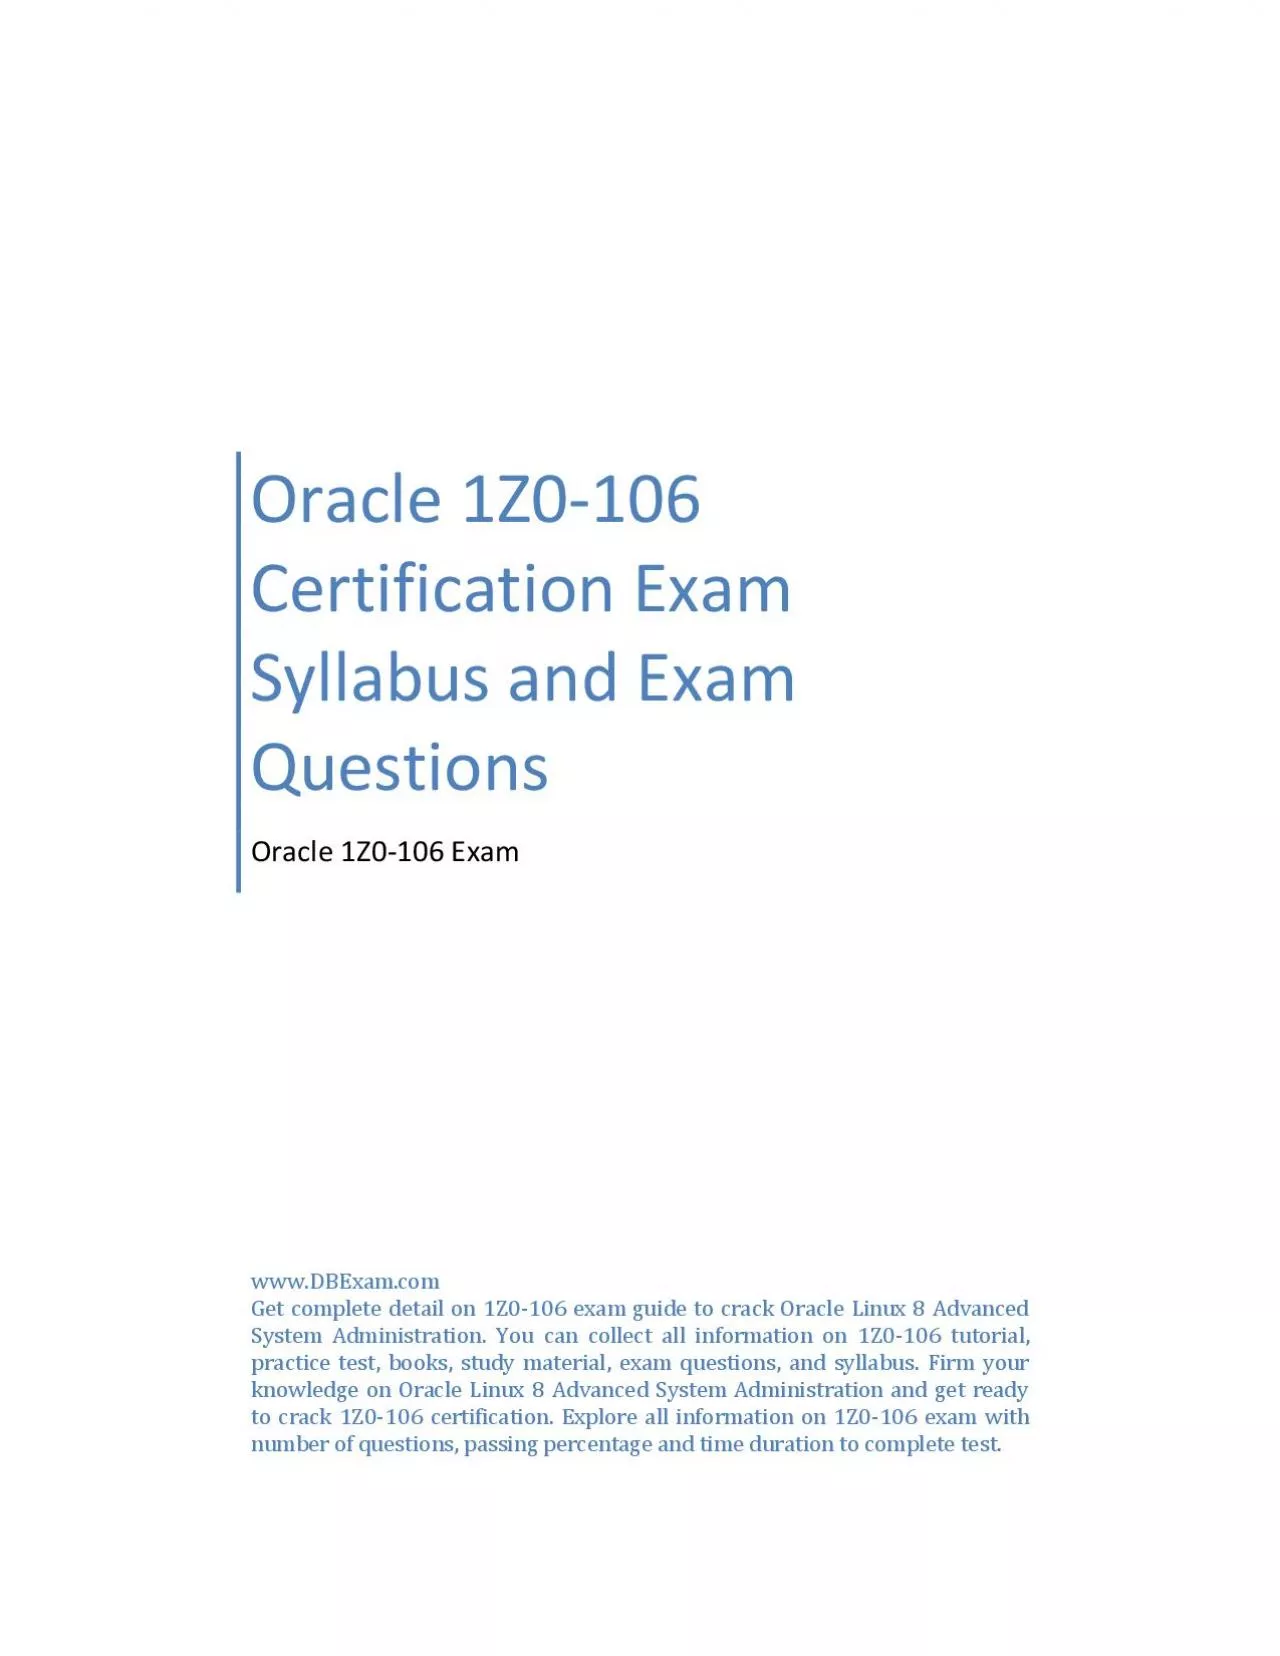 Oracle 1Z0-106 Certification Exam Syllabus and Exam Questions